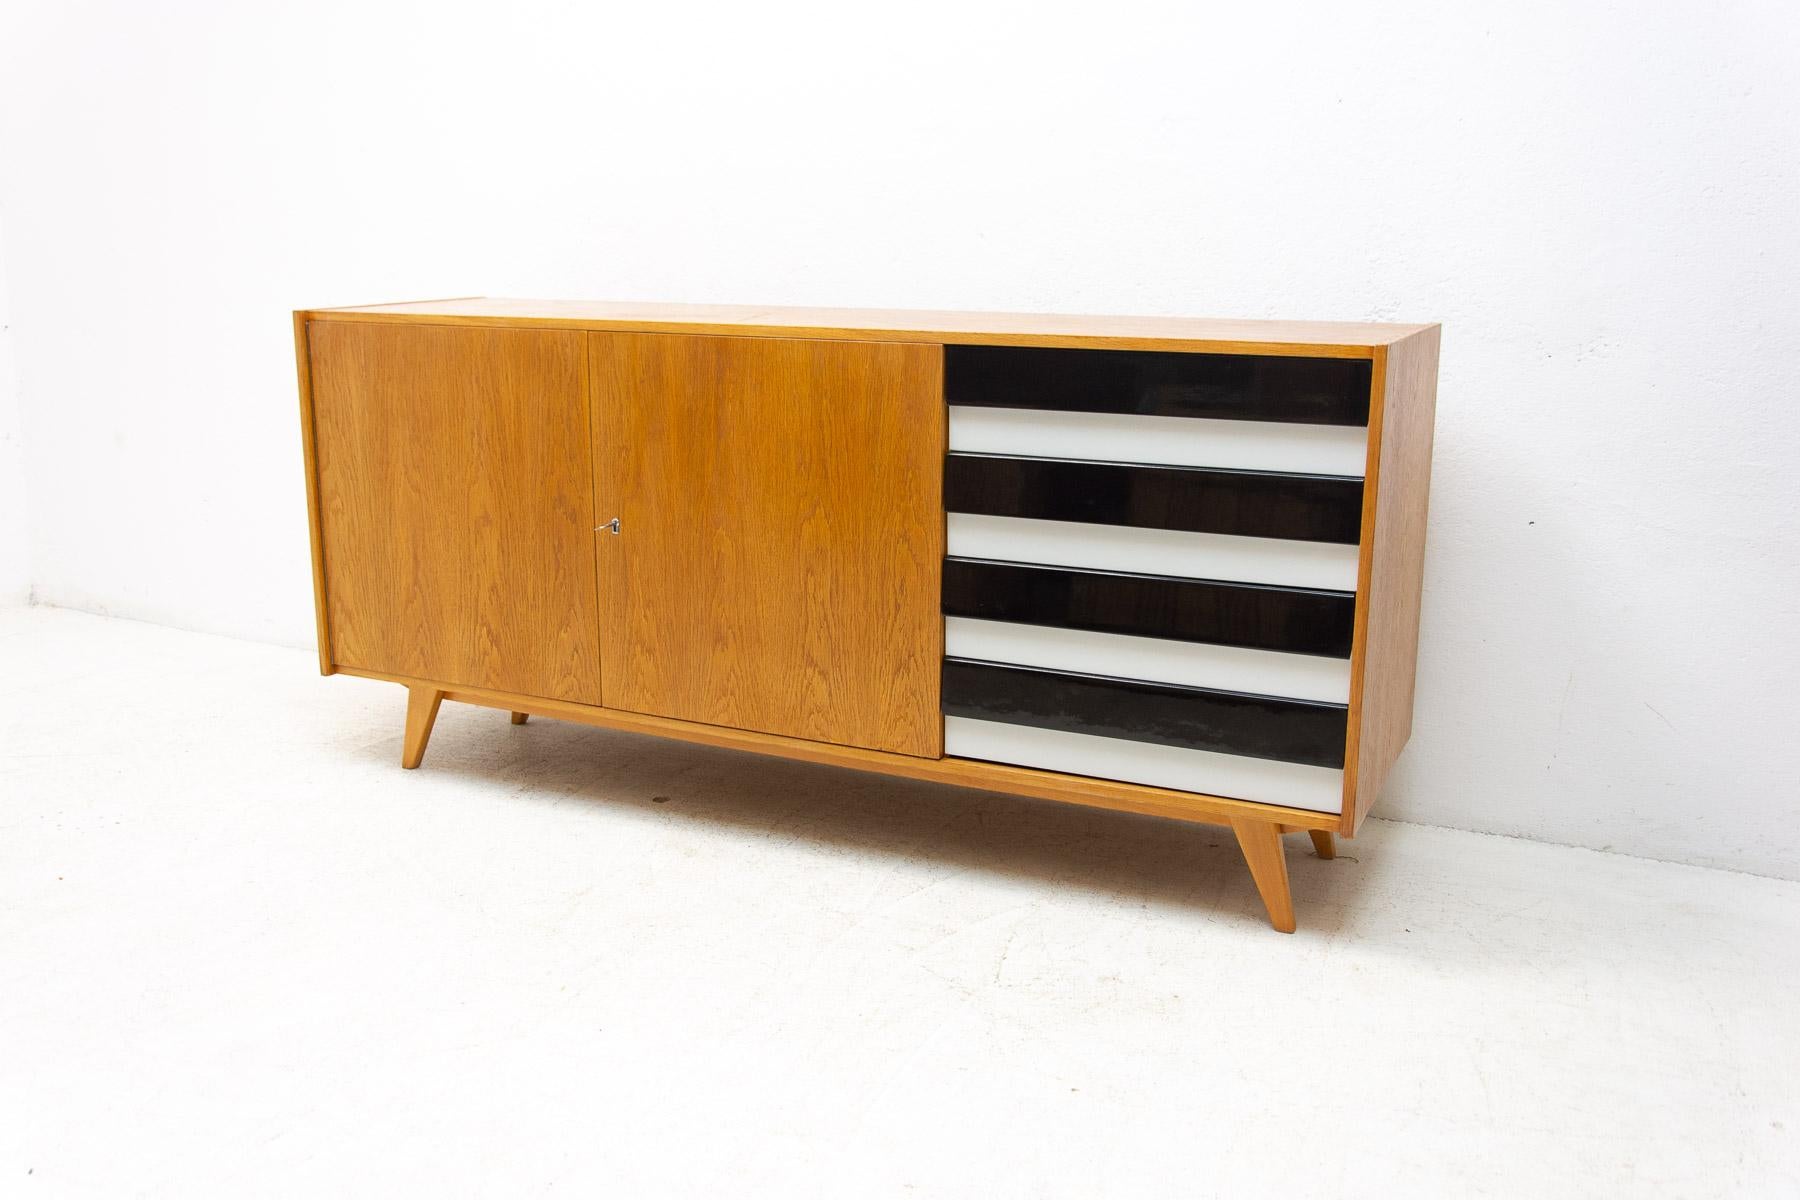 A popular Vintage sideboard model U-460 from the 1960´s. It was designed by Jiri Jiroutek for Interier Praha. It features a beech wood, plywood, colored lacquered drawers. In excellent condition, fully refurbished.

Measures: height: 76 cm,